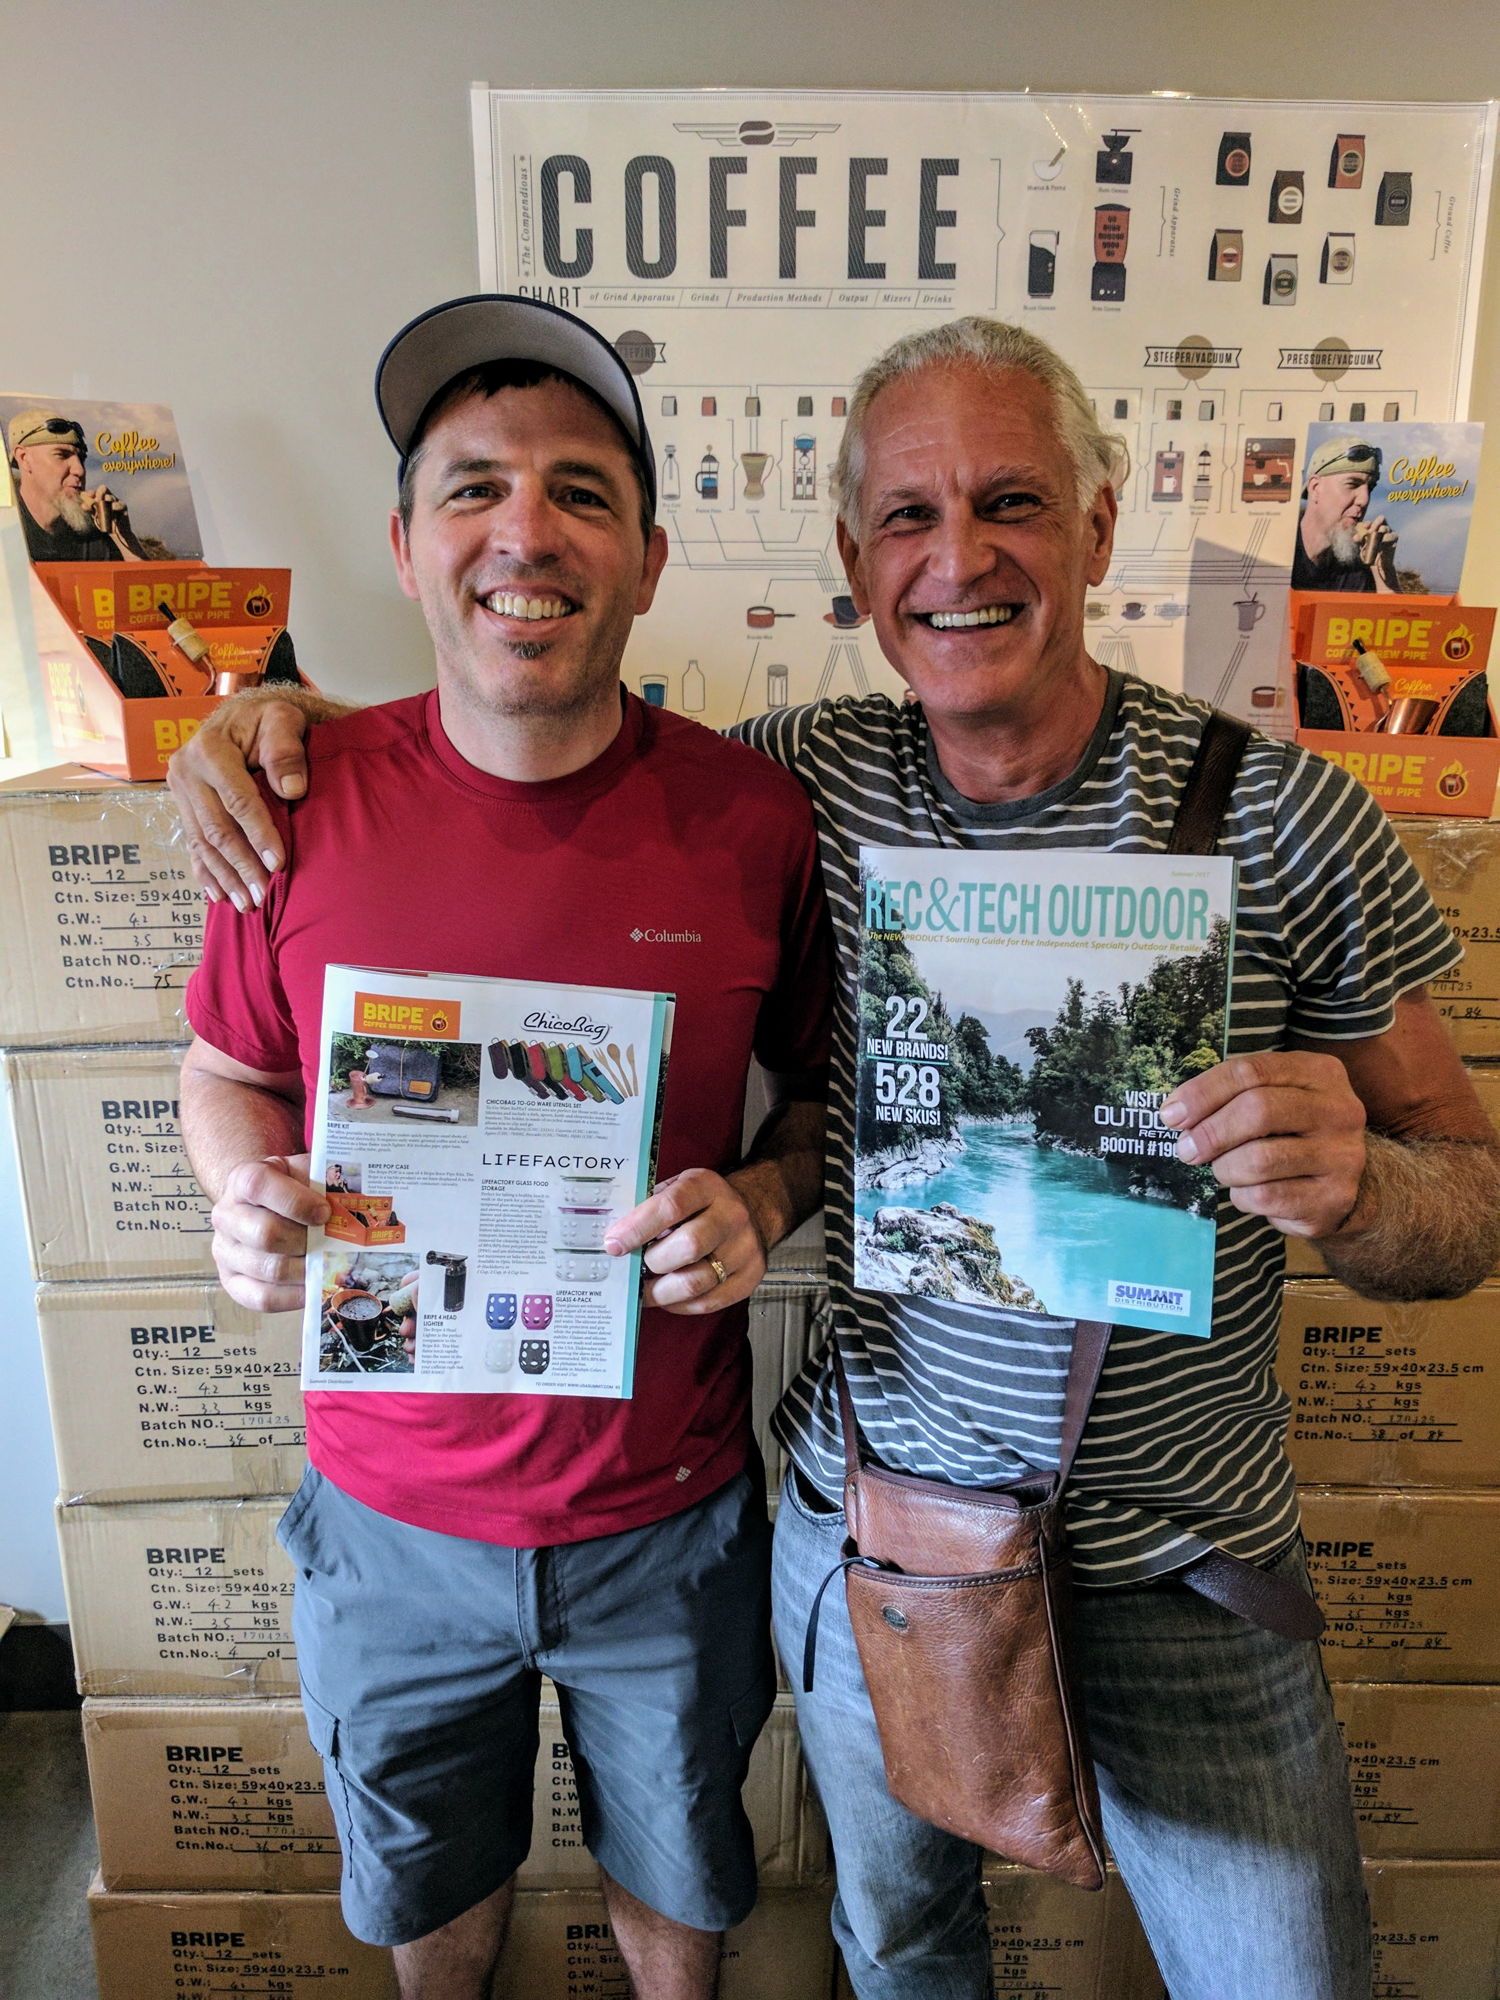 Co-founder Craig Hall (left) with Bripe inventor, friend and Co-founder Tim Panek (right) pictured with Summit Distribution REC&TECH product magazine